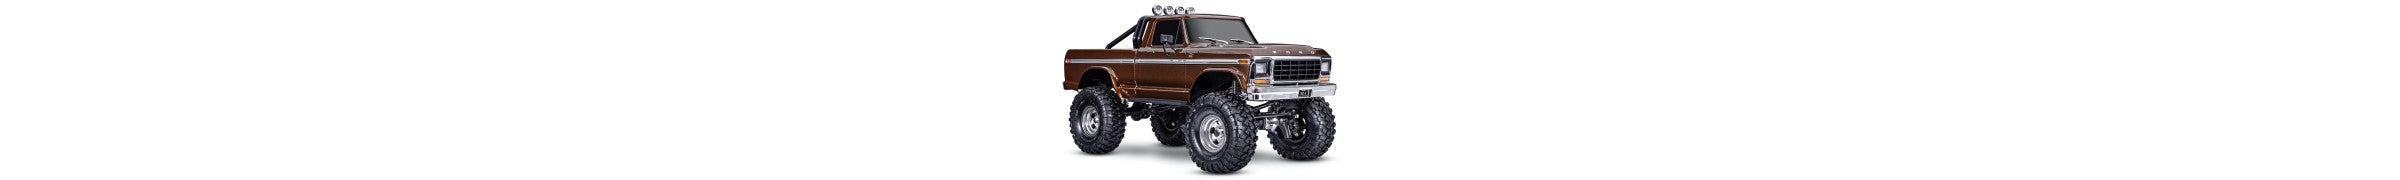 Parts for TRA-92046-4 TRX-4 Ford F-150 Ranger XLT